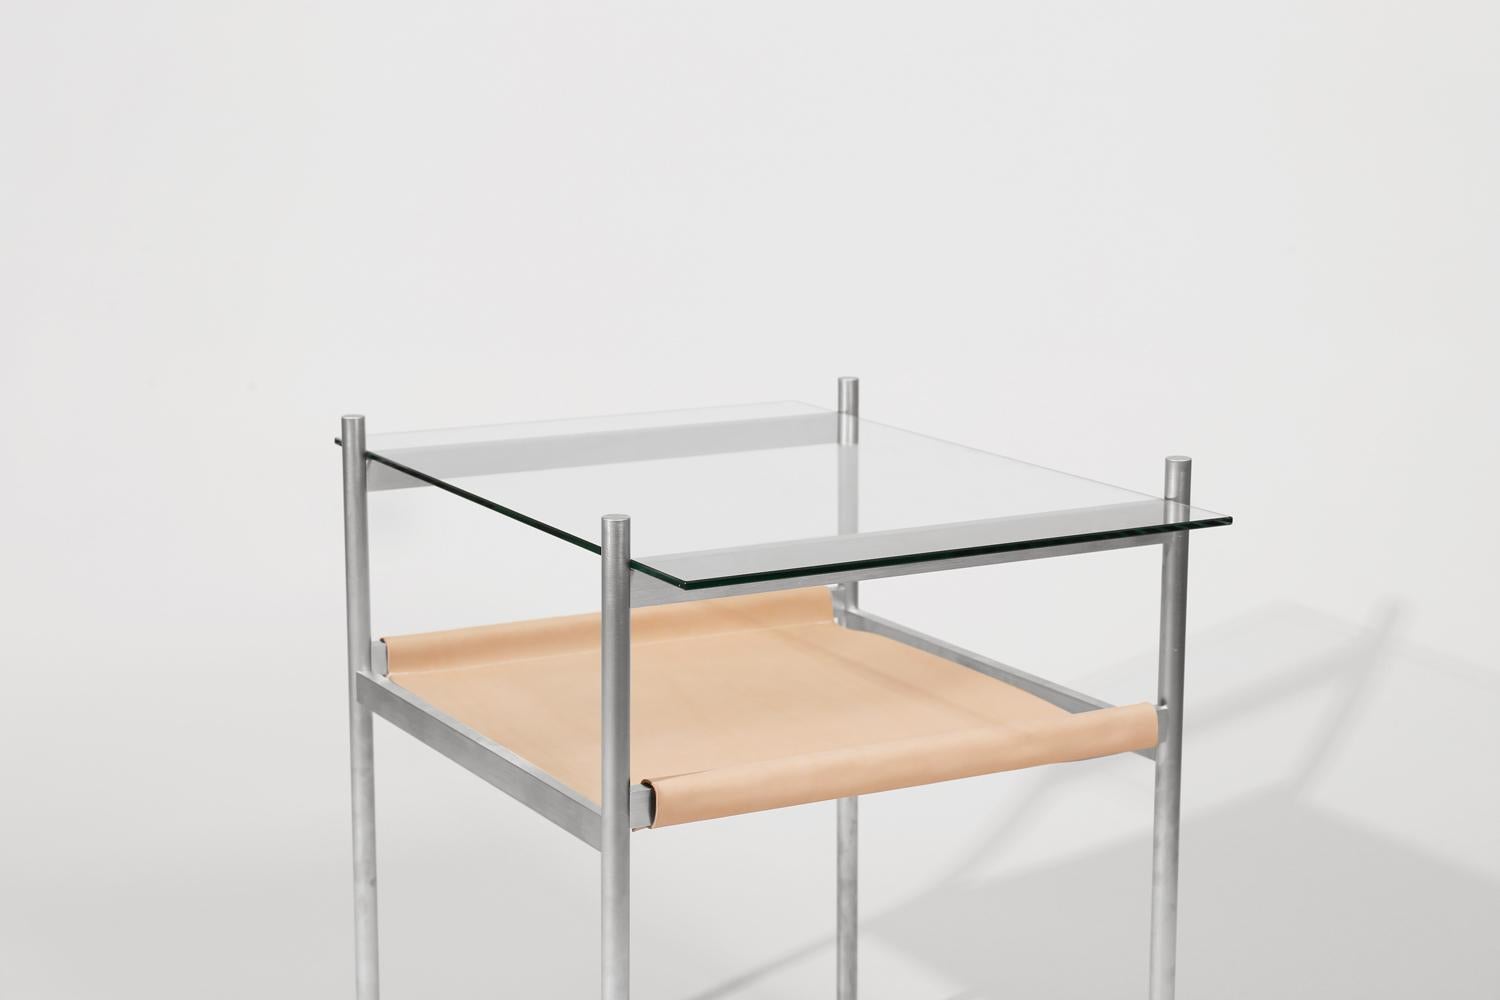 Made to order. Please allow six weeks for production.

Aluminum frame / clear glass / natural leather sling

The Duotone Furniture series is based on a modular hardware system that pairs sturdy construction with visual lightness and a range of